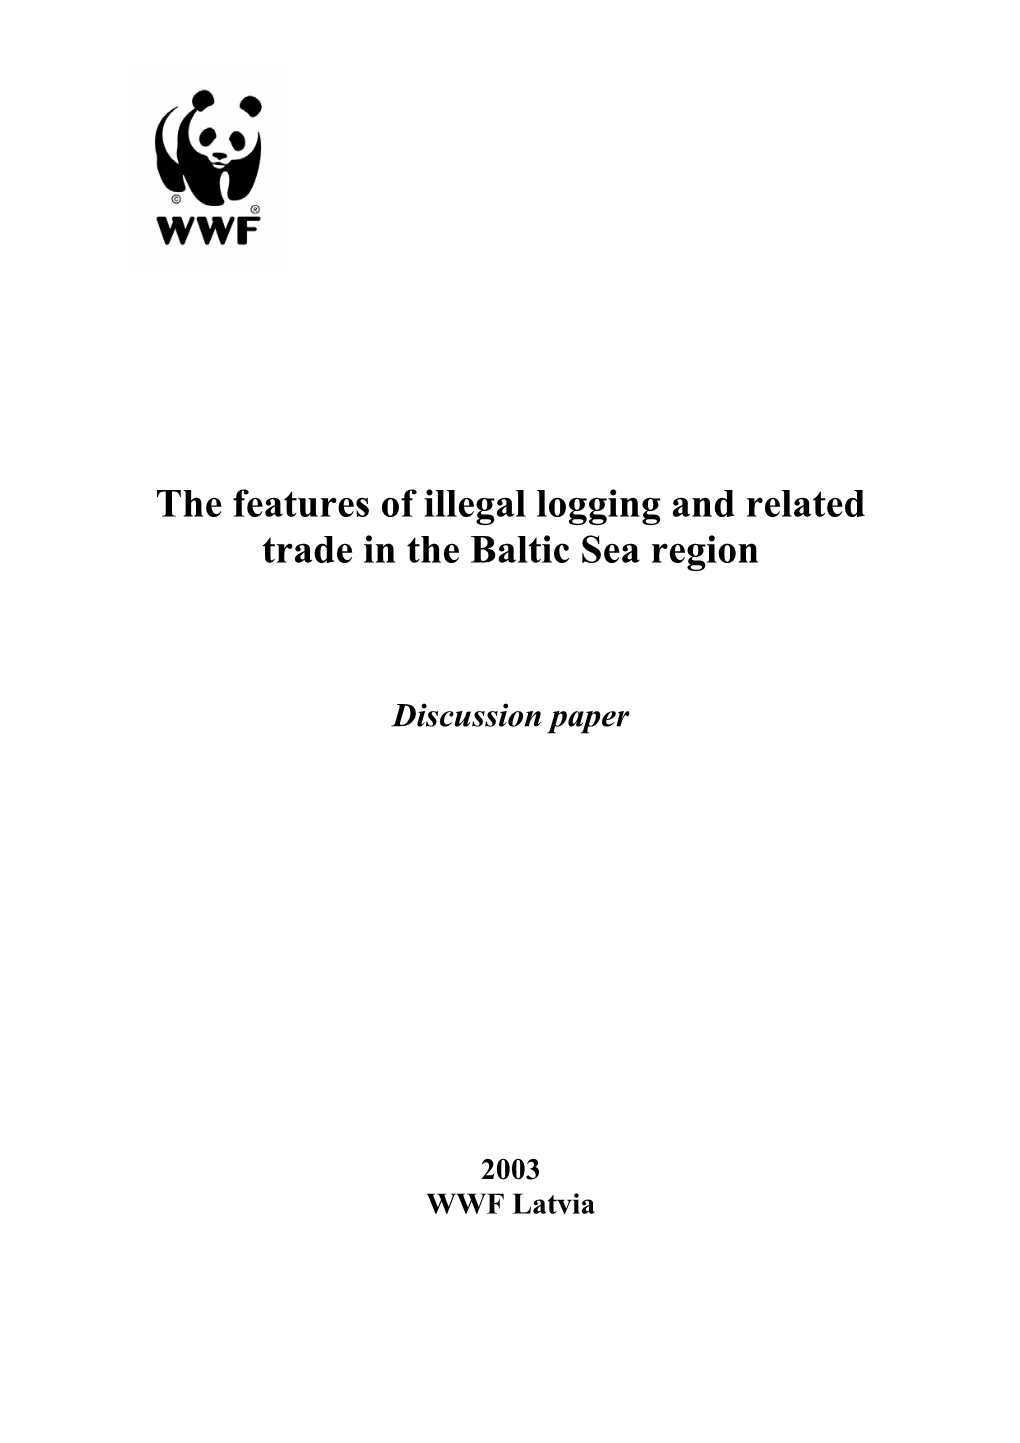 The Features of Illegal Logging and Related Trade in the Baltic Sea Region